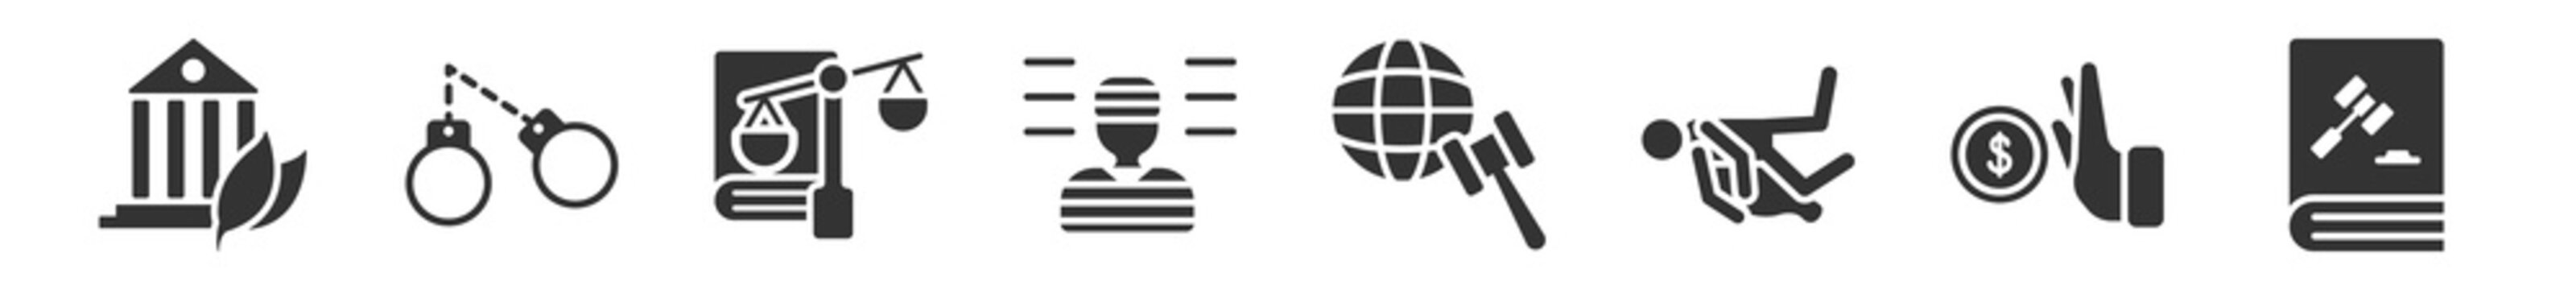 Filled Set Of Law And Justice Icons. Glyph Vector Icons Such As Environmental Law, Criminal Law, Labour And Social Prisoner, Diplomacy, Constitutional Vector Illustration.